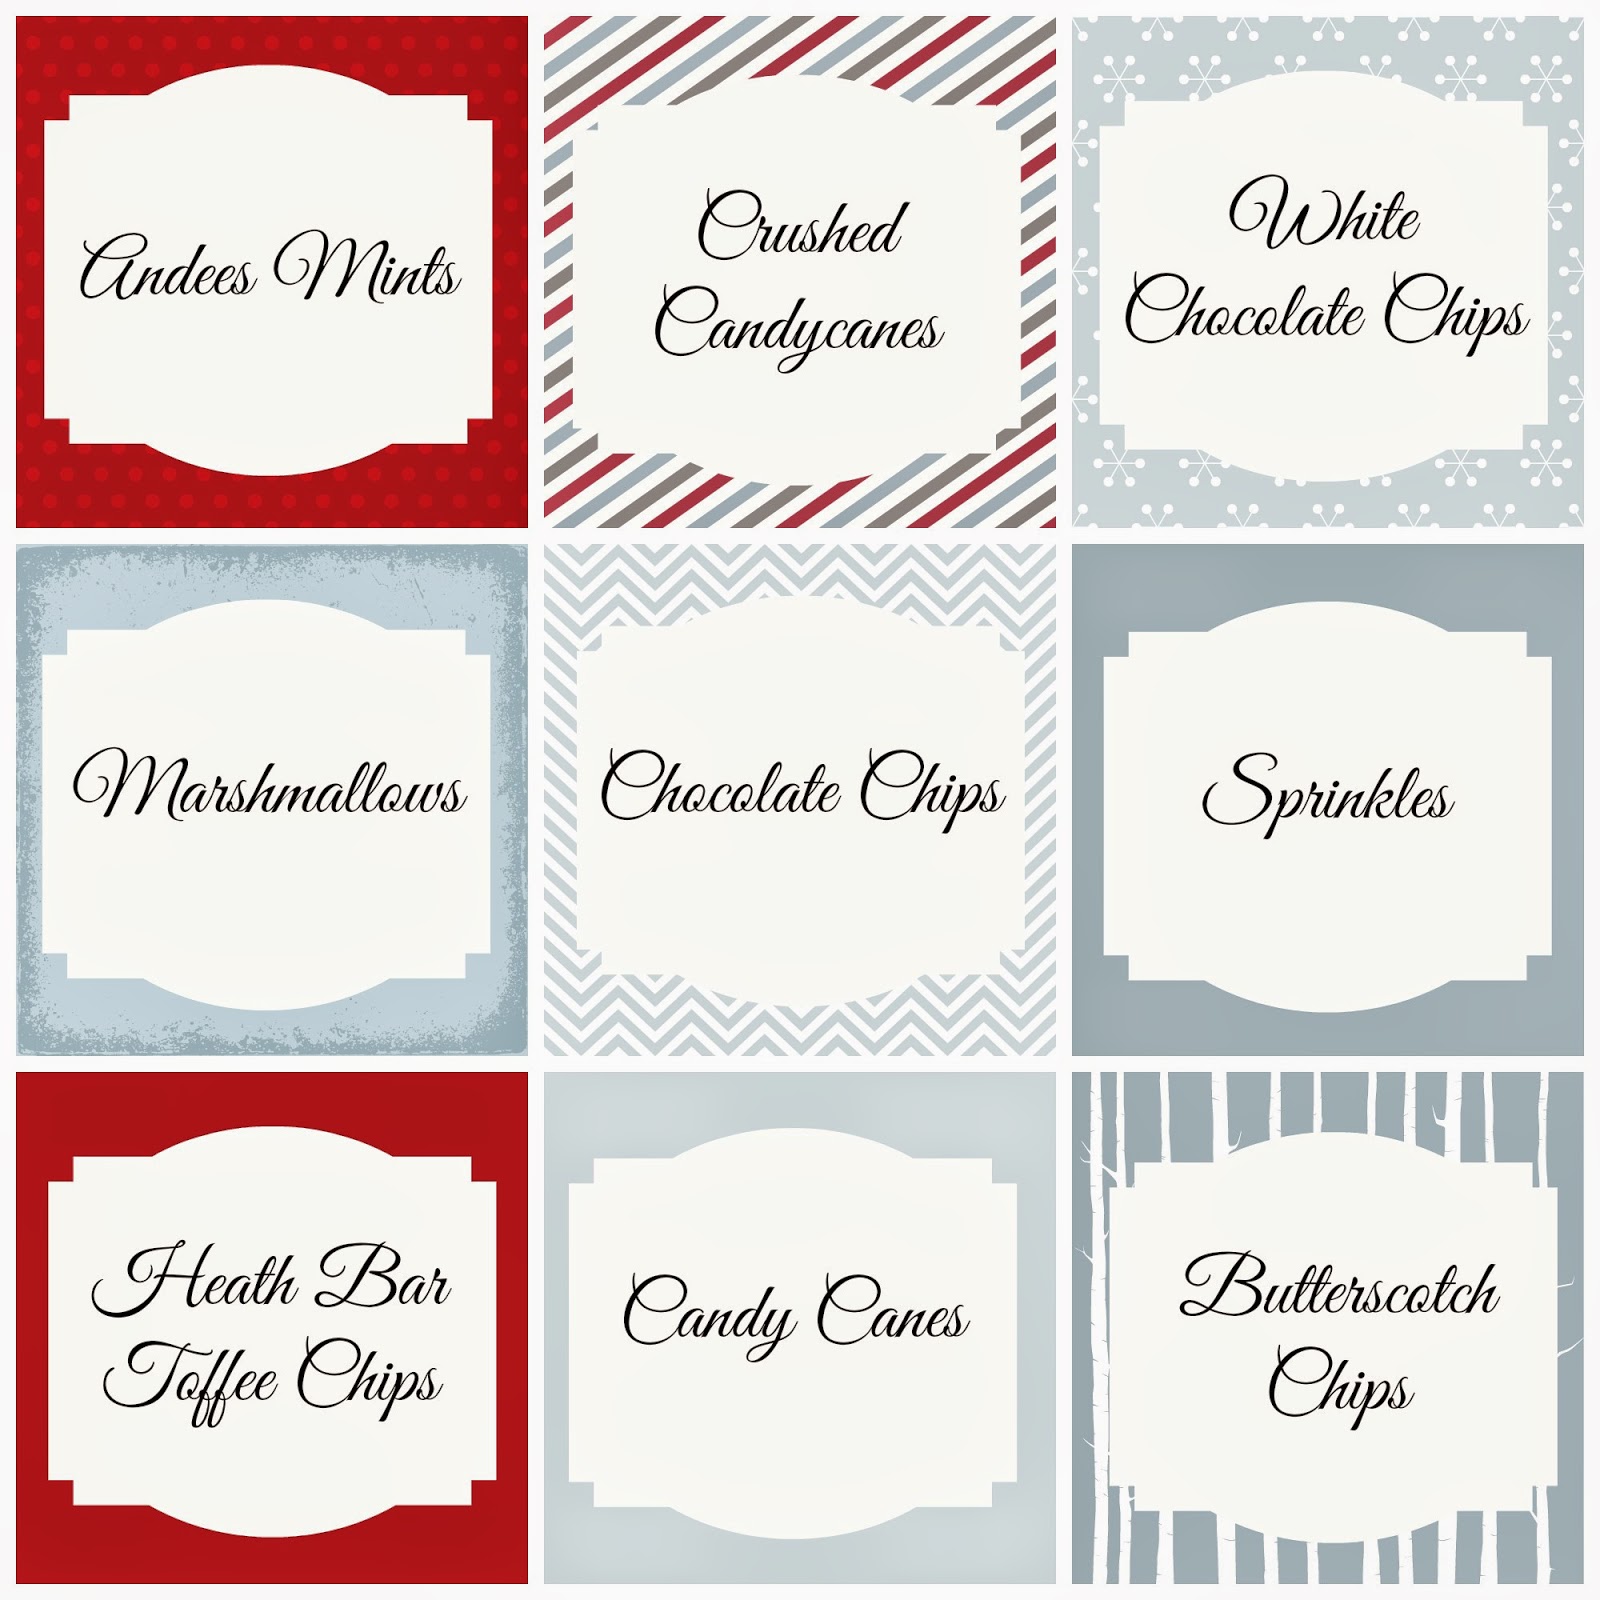 Hot Chocolate Bar + FREE Printables Sweetly Made (Just for you)